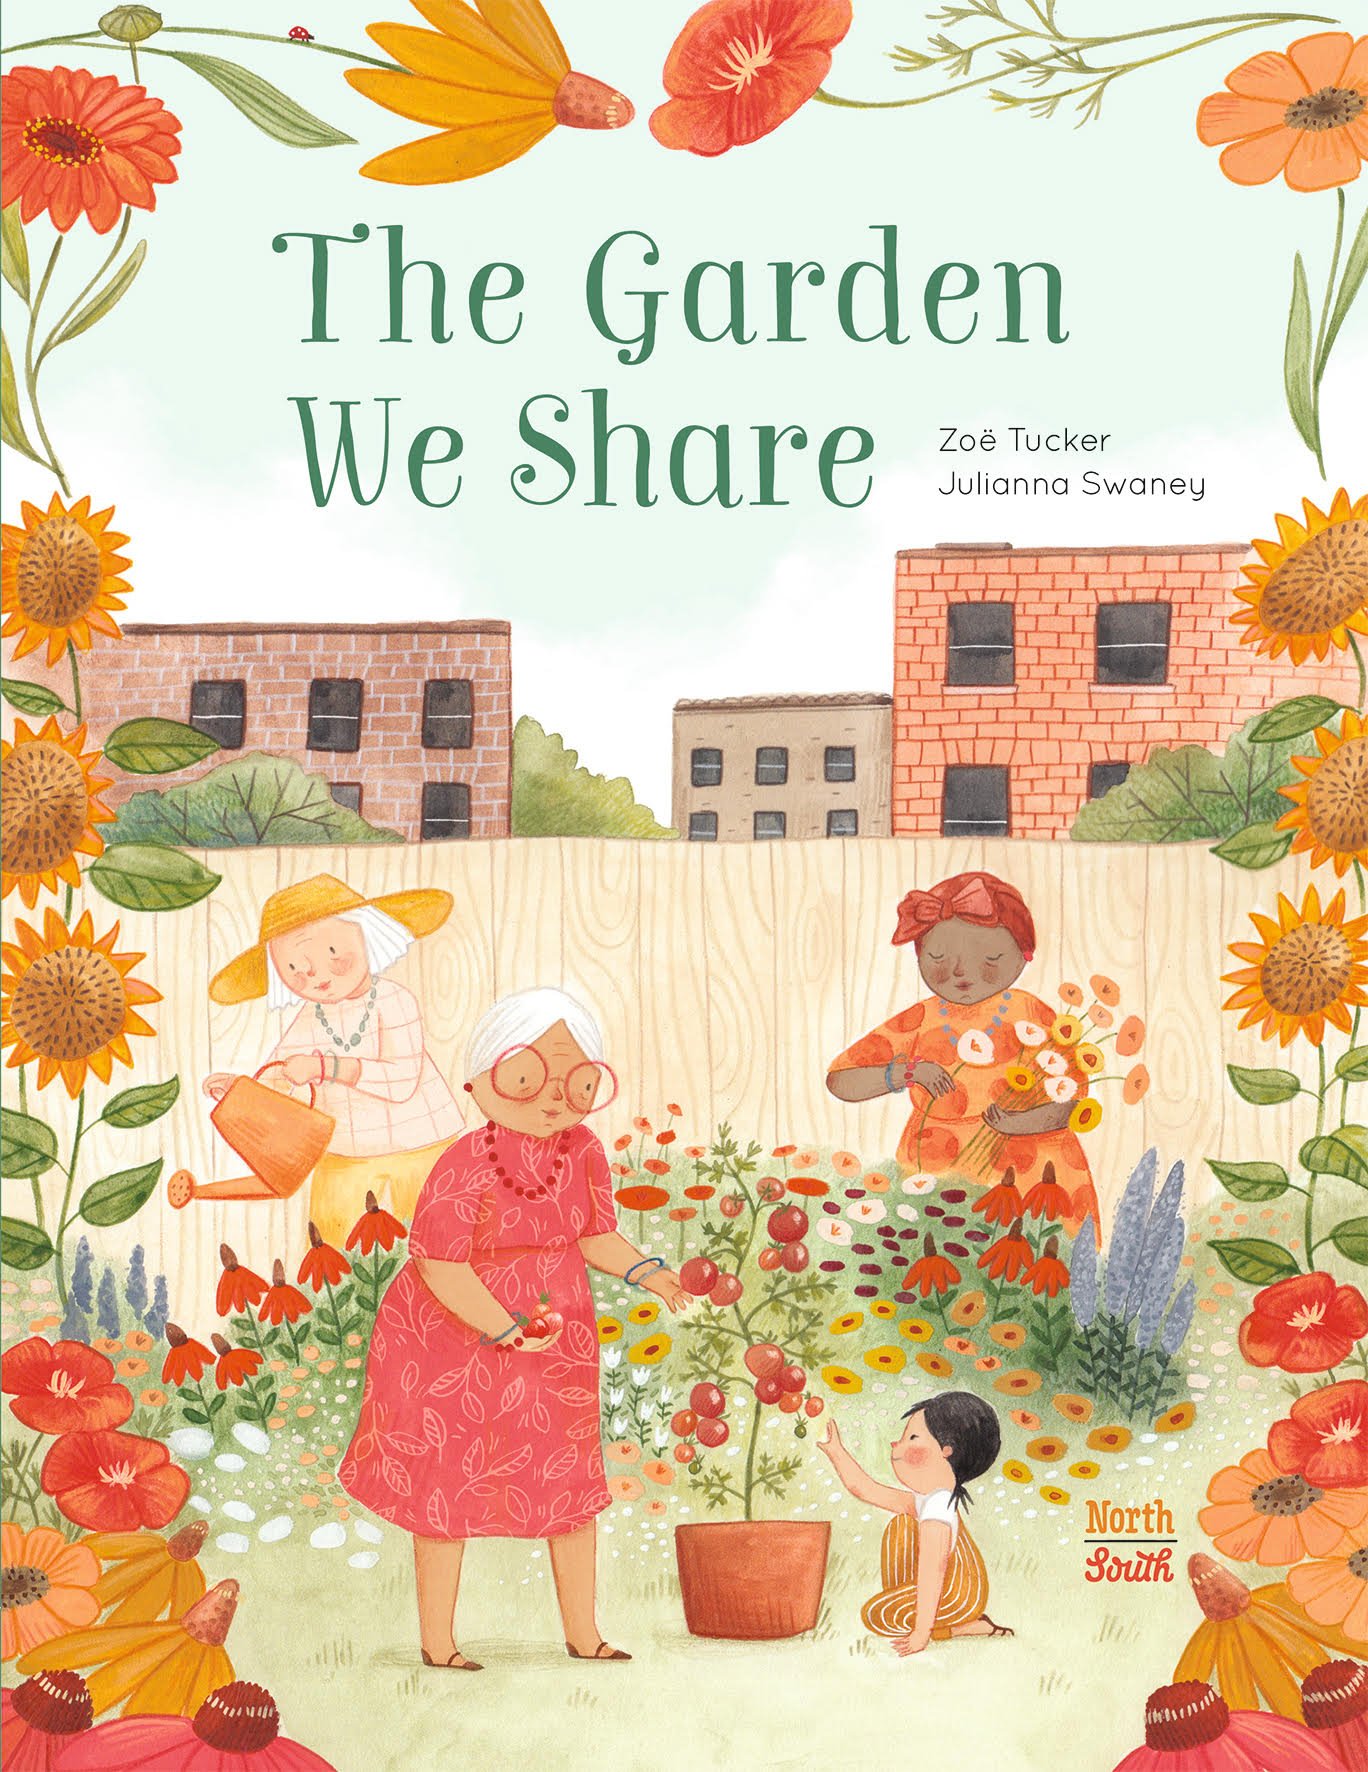 The-Garden-We-Share-Publishers-final-cover-for-Promo.jpg